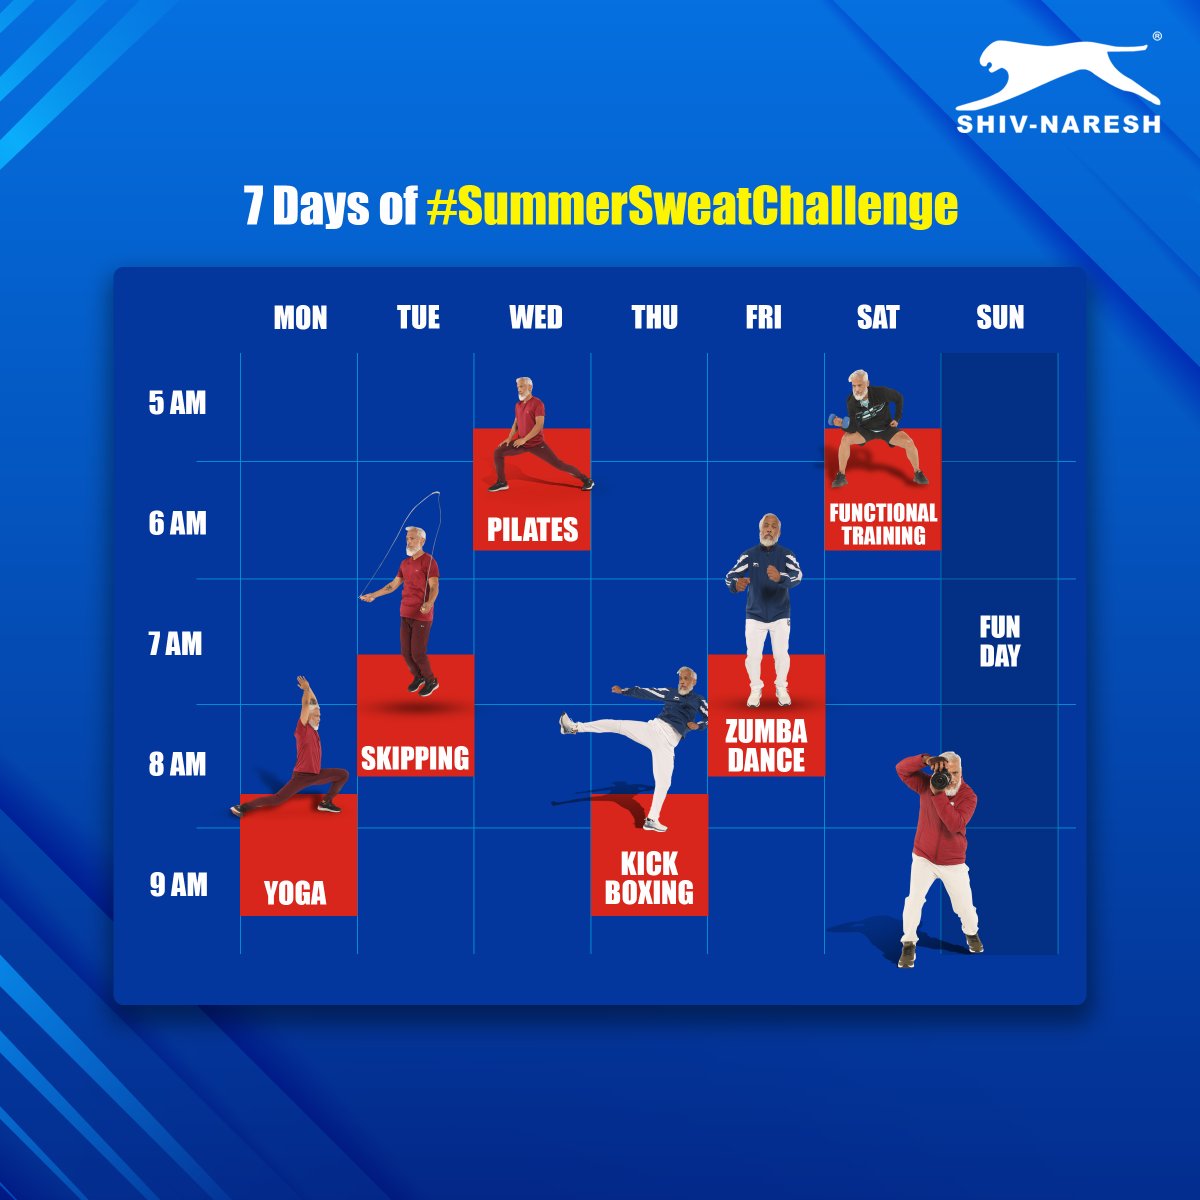 #GiveawayAlert Participate Now!    
Giveaway Rules:  
1. Follow us on X.com and on YouTube at youtube.com/@shivnareshind  
2. Share your progress using #SummerSweatChallenge  
3. Retweet the post using #ShivNaresh
     
Tag your friends in the comments for BONUS…